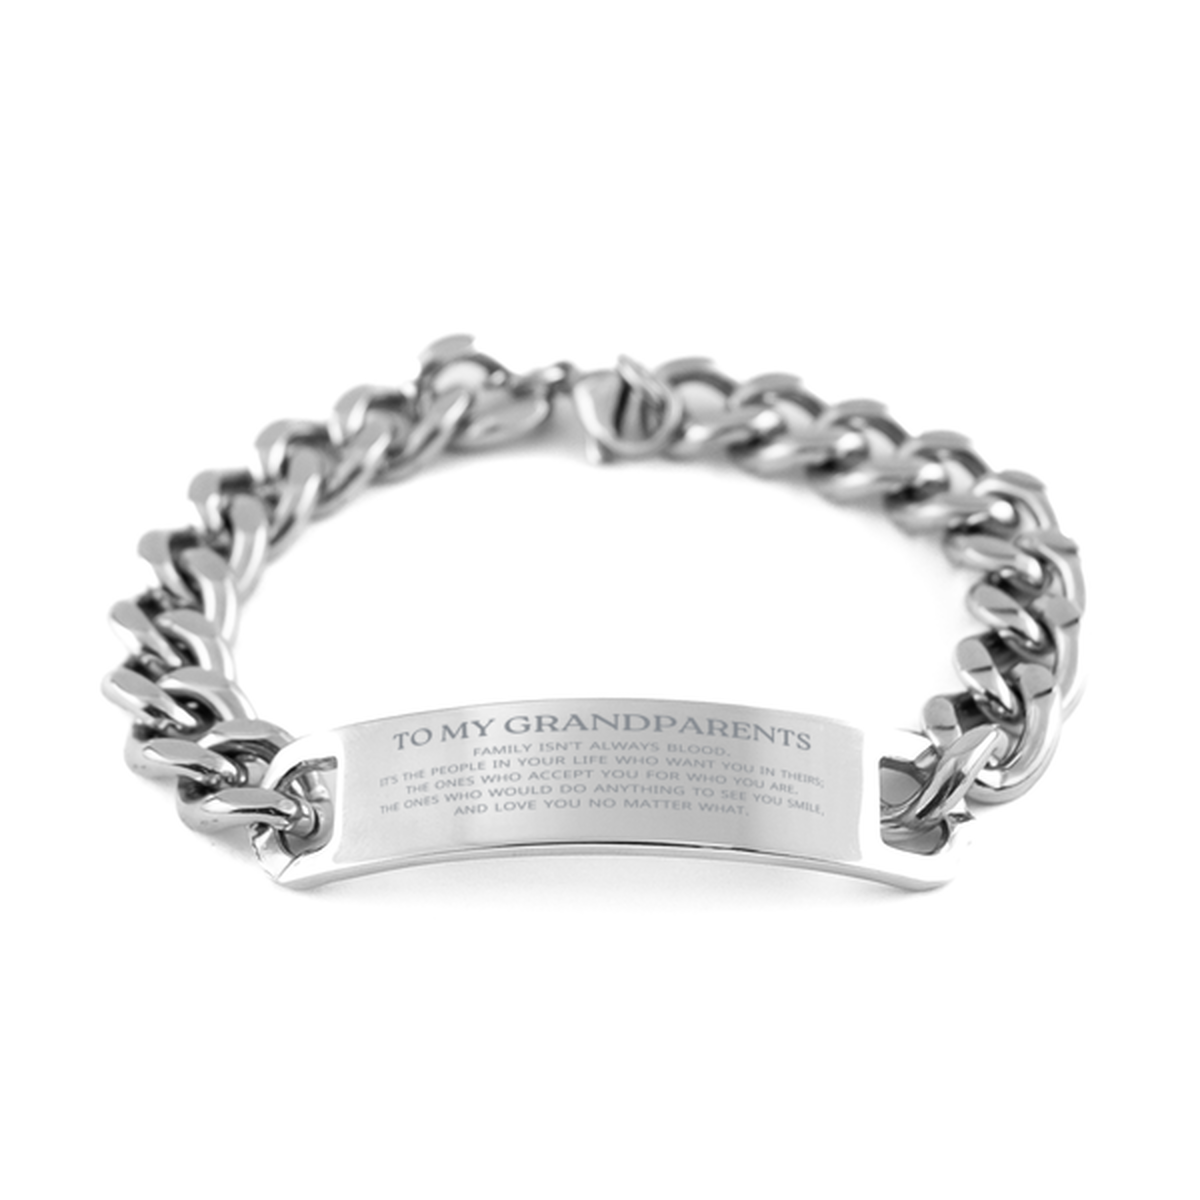 To My Grandparents Gifts, Family isn't always blood, Grandparents Cuban Chain Stainless Steel Bracelet, Birthday Christmas Unique Present For Grandparents